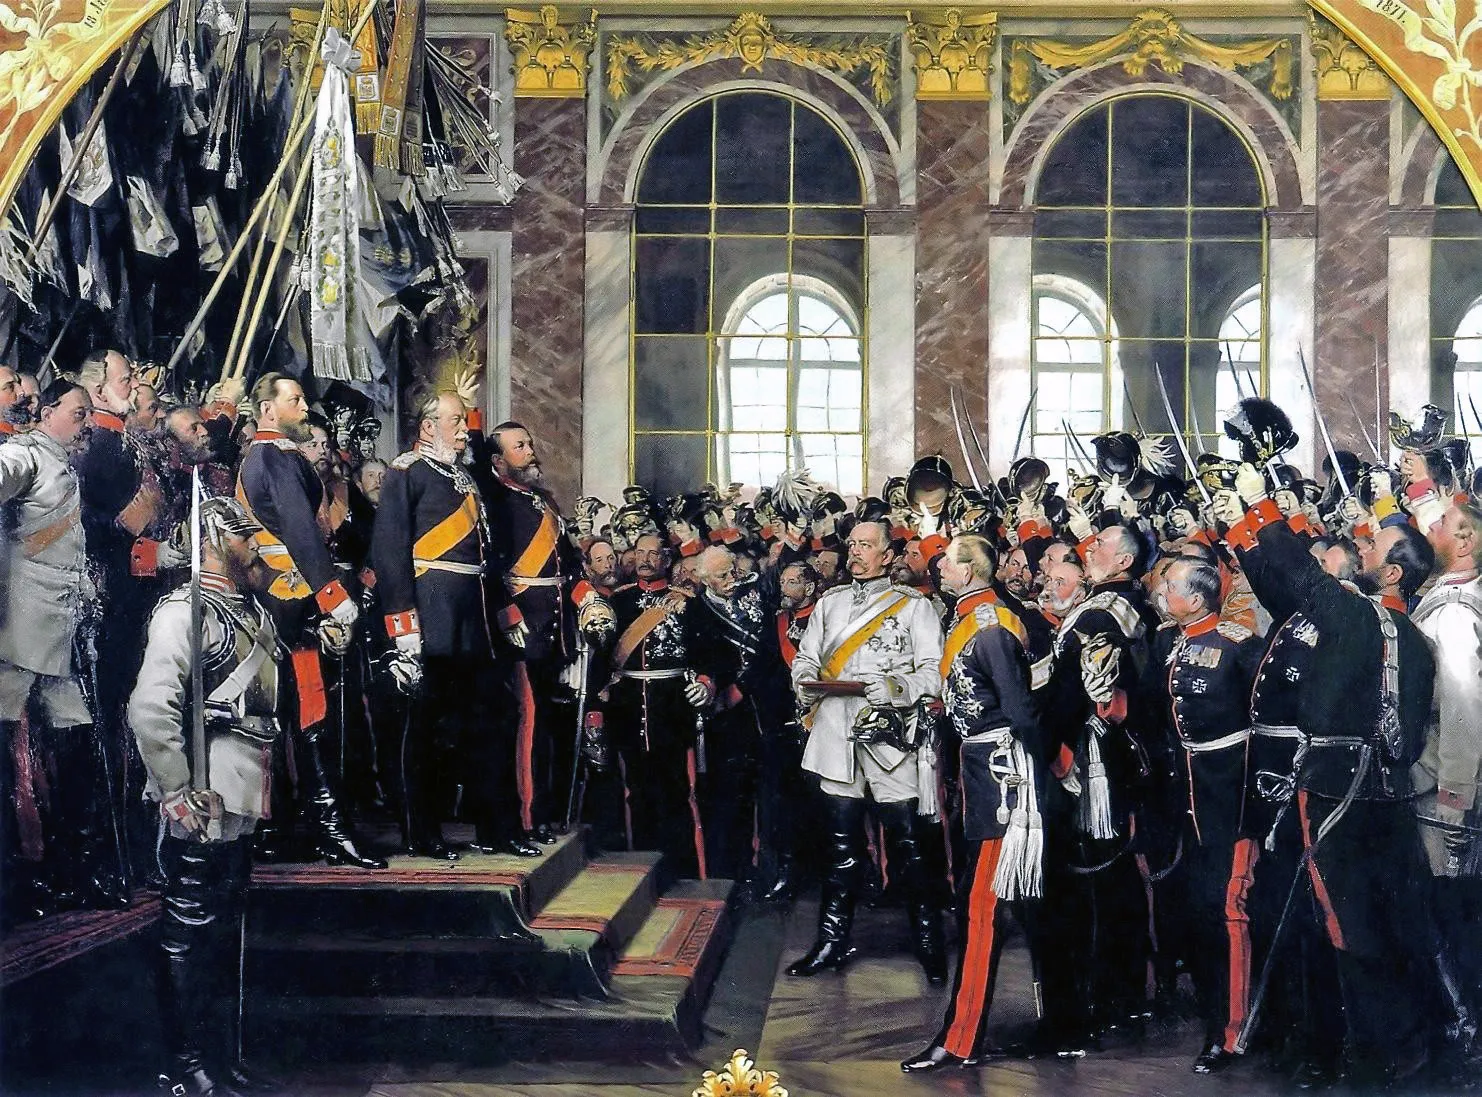 Photo showing: The third version of the proclamation of Prussian king Wilhelm I as German Emperor at Versailles, by Anton von Werner. The first two versions were destroyed in the Second World War. This version was commissioned by the Prussian royal family for chancellor Bismarck's 70th birthday. Note that the subjects are portrayed as the age they were when the work was painted in 1885, not the age they were at when the event occurred in 1871.